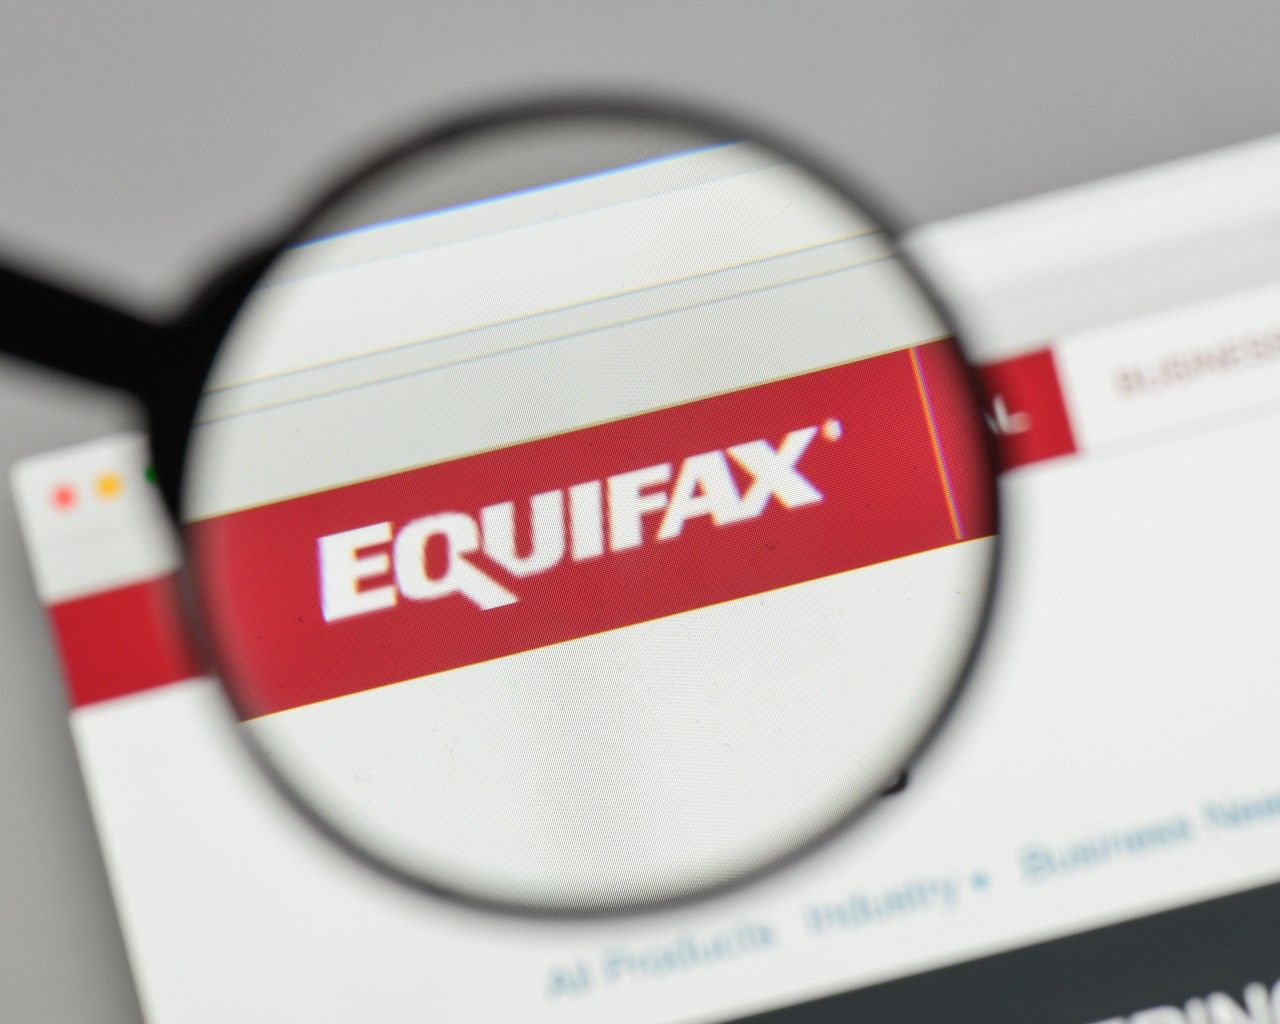 equifax-data-breach-settlement-extended-claim-period-open-through-january-2024-top-class-actions